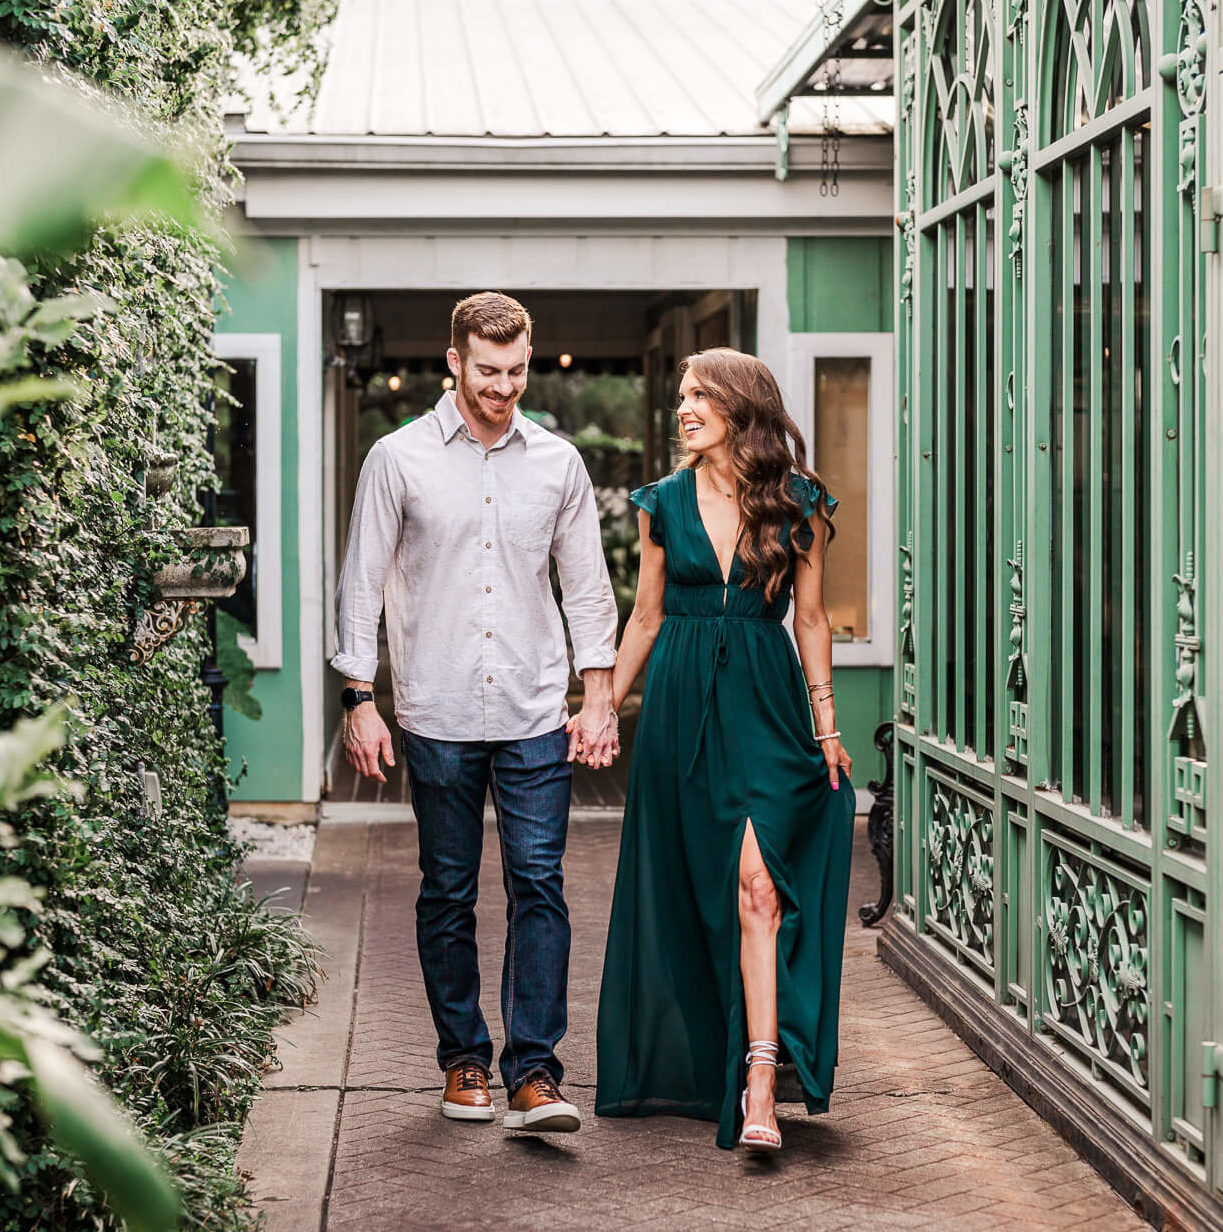 Man and woman walking through path in downtown Fairhope's French Quarter for their engagement photos. They are laughing and smiling while holding hands.